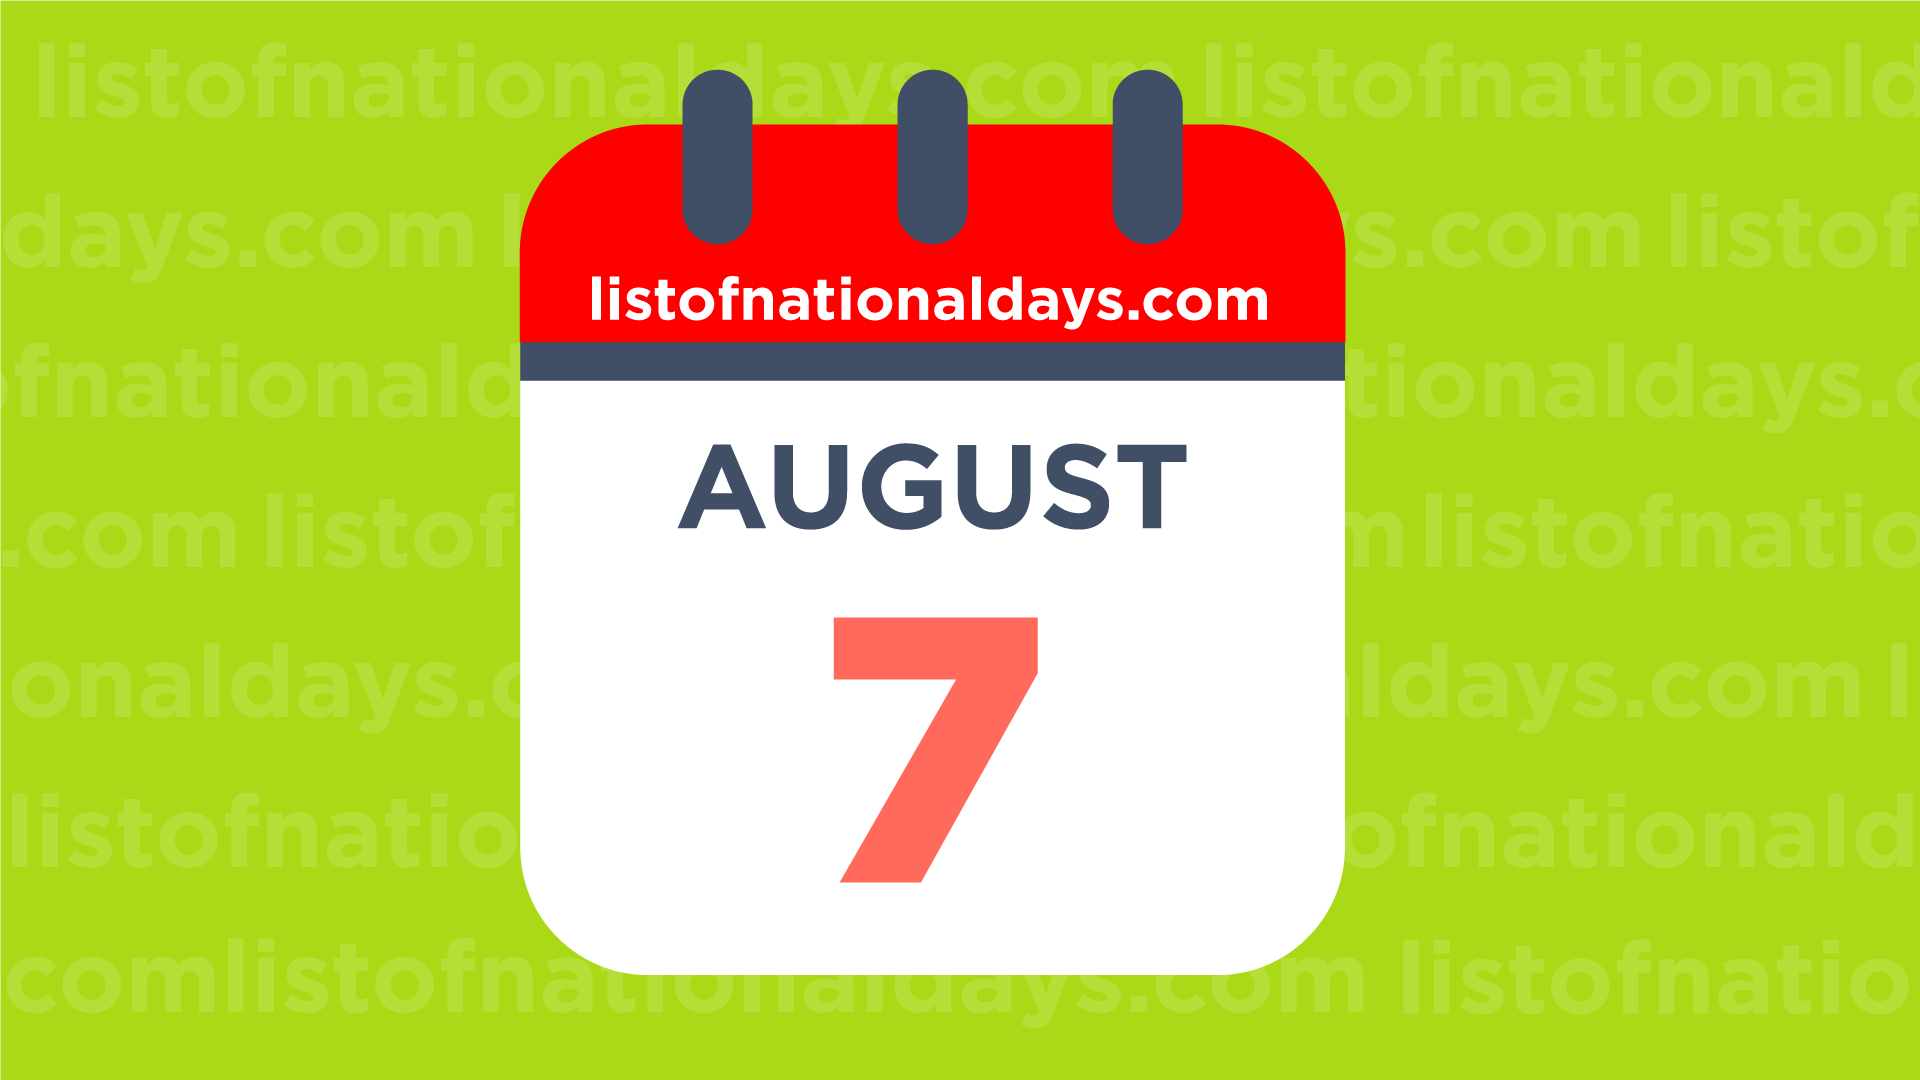 August 7th National Holidays,Observances and Famous Birthdays